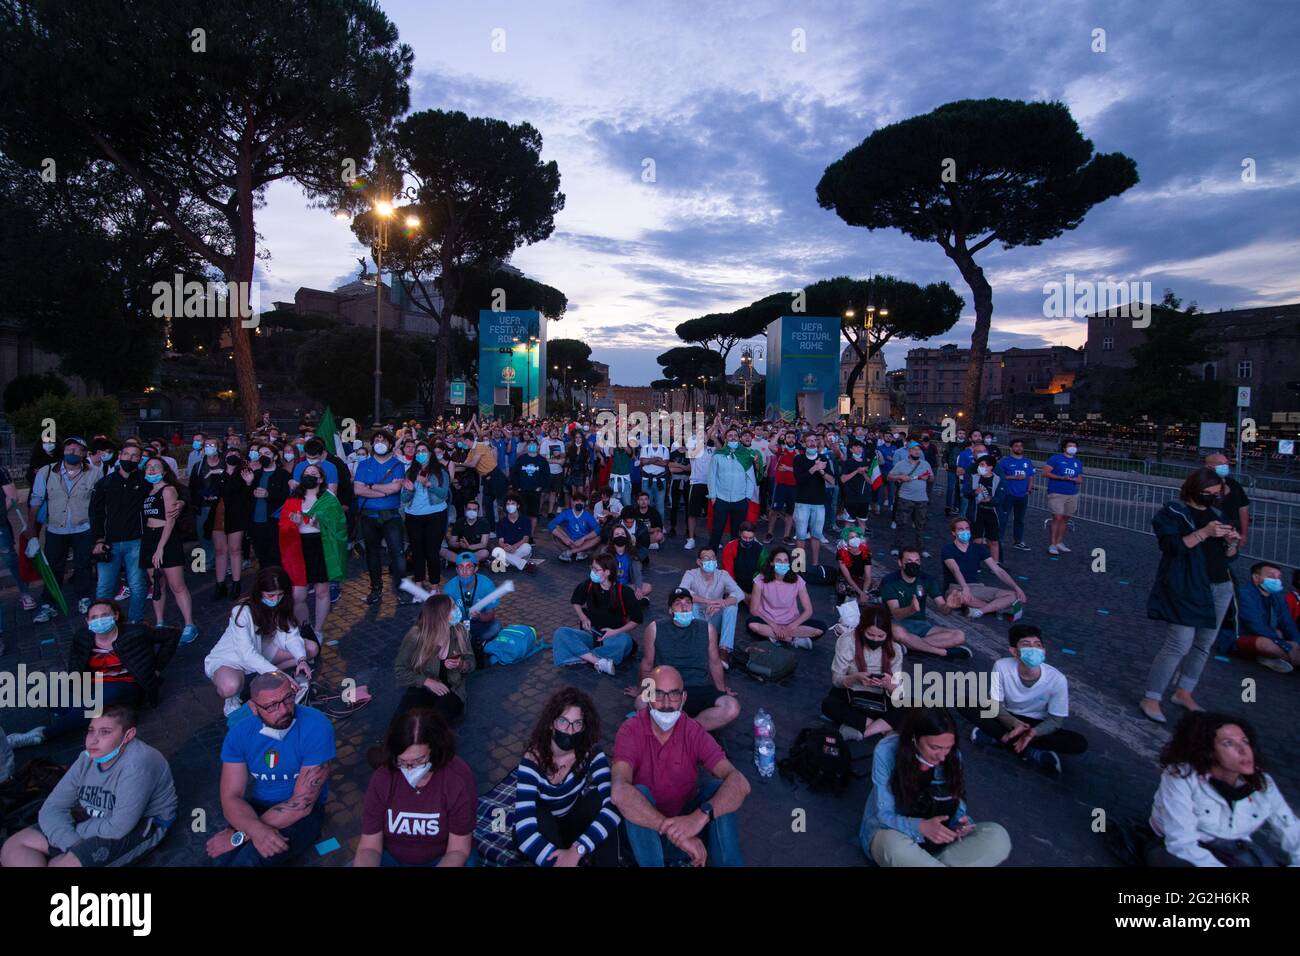 Rome, Italy. 11th June, 2021. Italy supporters on Via dei Fori Imperiali in RomeOn the occasion of European Football Championships, a maxi-screen was installed along via dei Fori Imperiali in Rome, with a limited number of people due to Covid-19 pandemic. Opening match between Italy and Turkey with Italian supporters seen on Via dei Fori Imperiali. (Photo by Matteo Nardone/Pacific Press) Credit: Pacific Press Media Production Corp./Alamy Live News Stock Photo